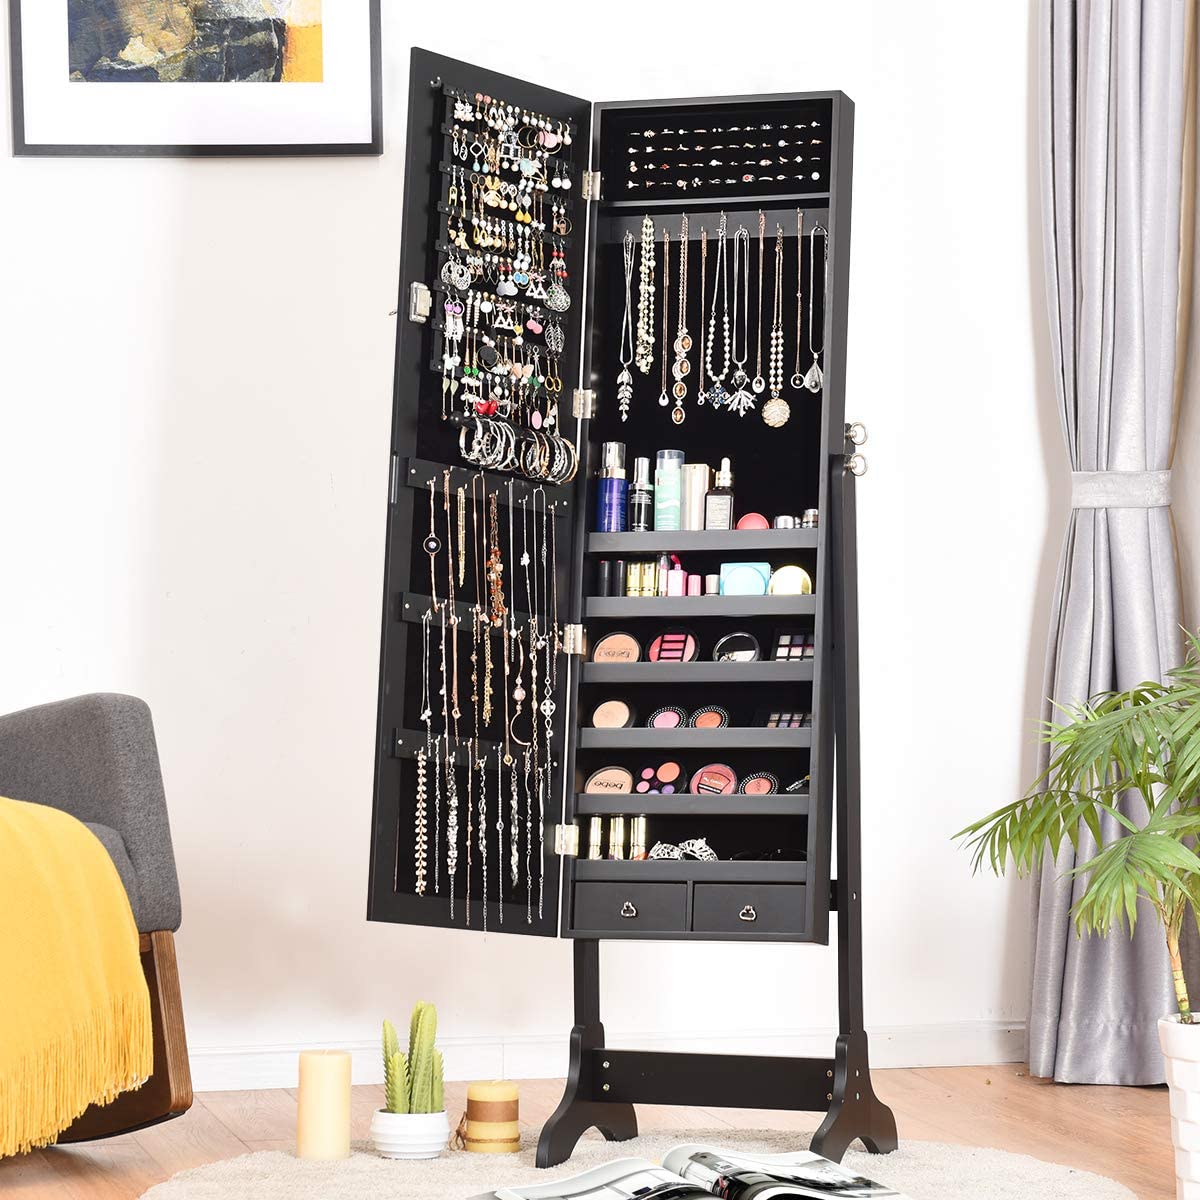 Lockable Standing Jewelry Armoire with Full Length Mirror - Giantex